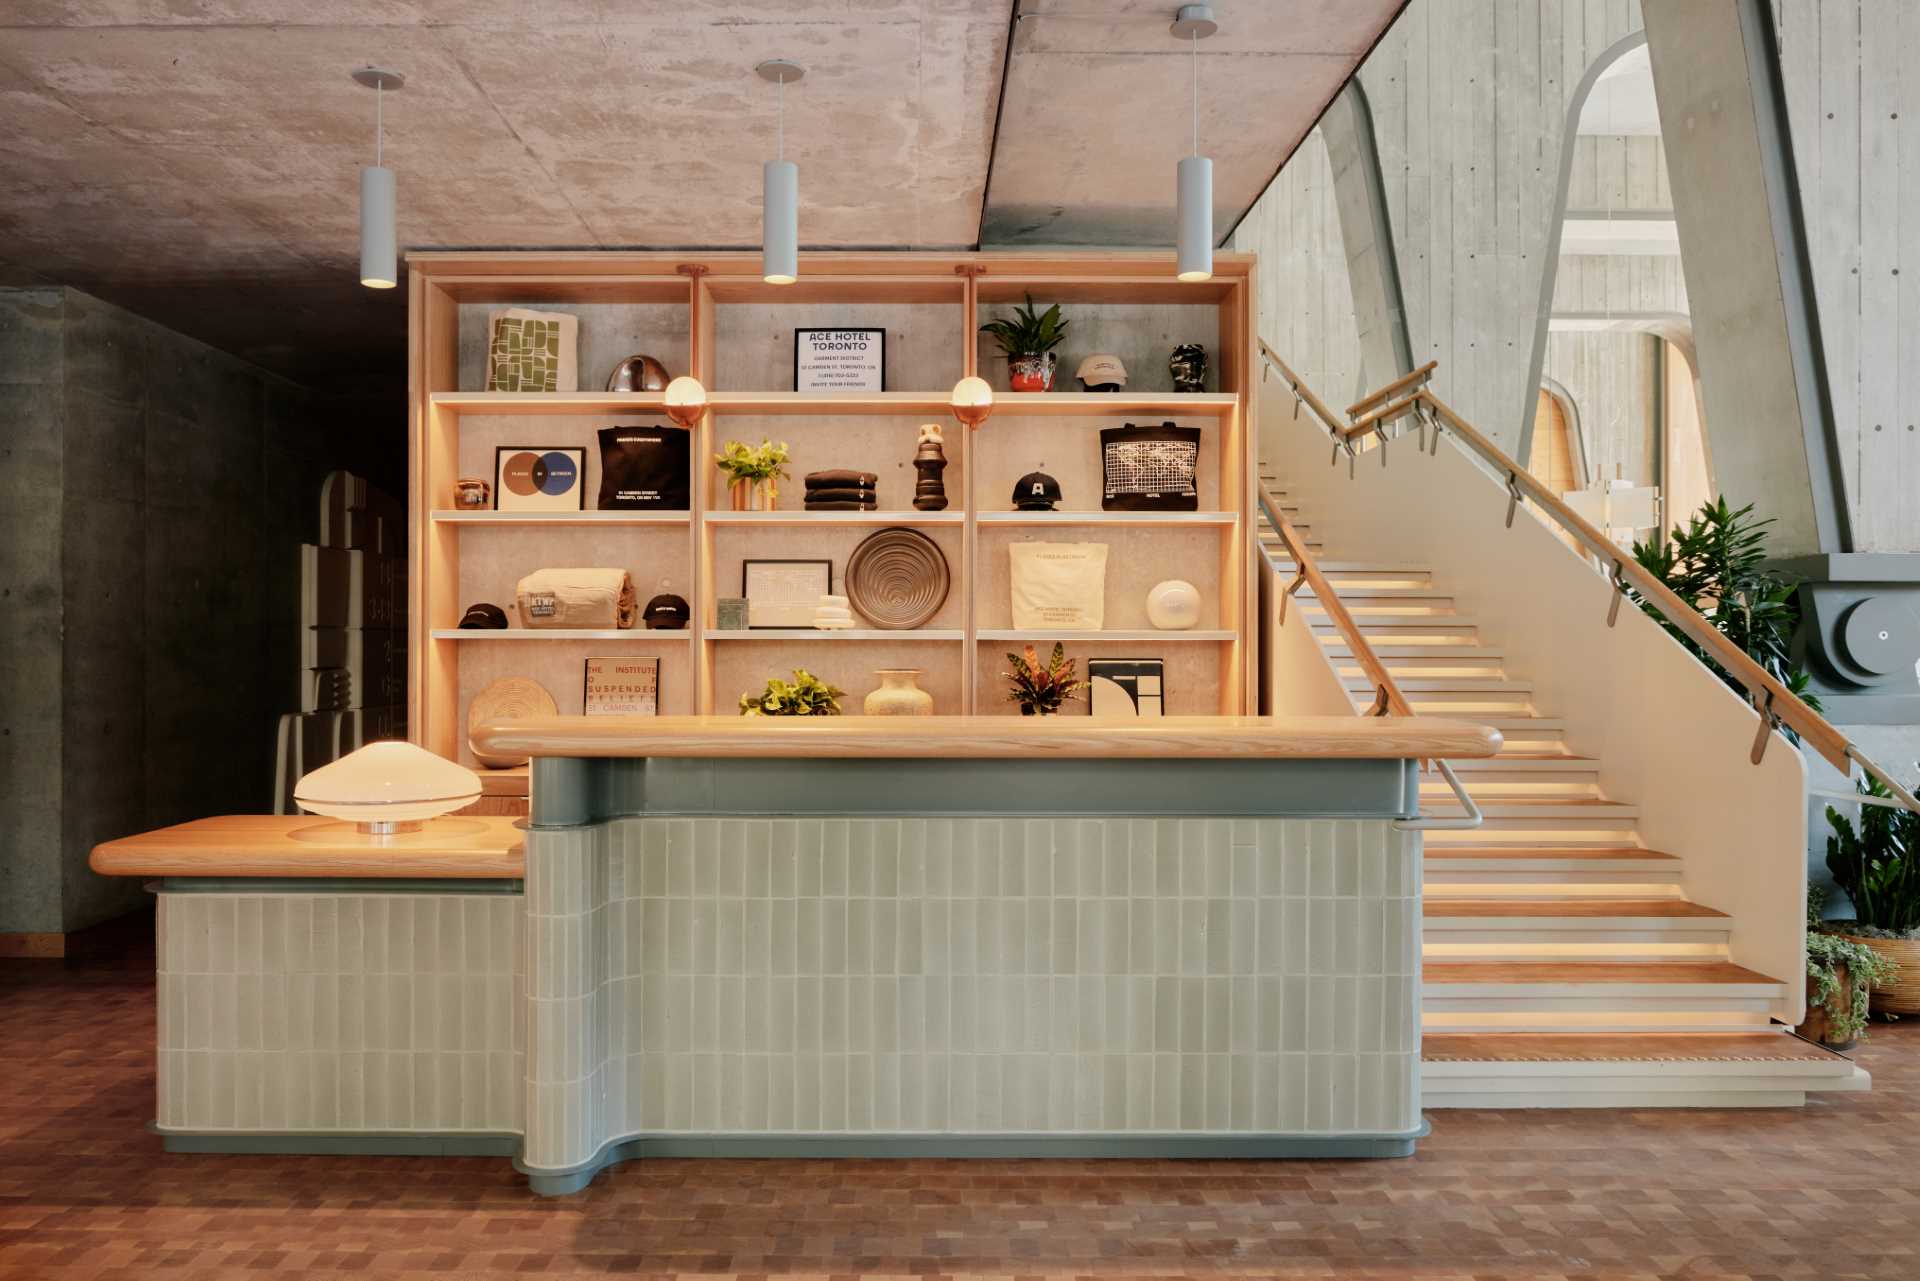 This modern hotel lobby has a welcoming design, with pale green tiles that clad the reception desk, while the wood countertop and shelving complement the nearby stairs.